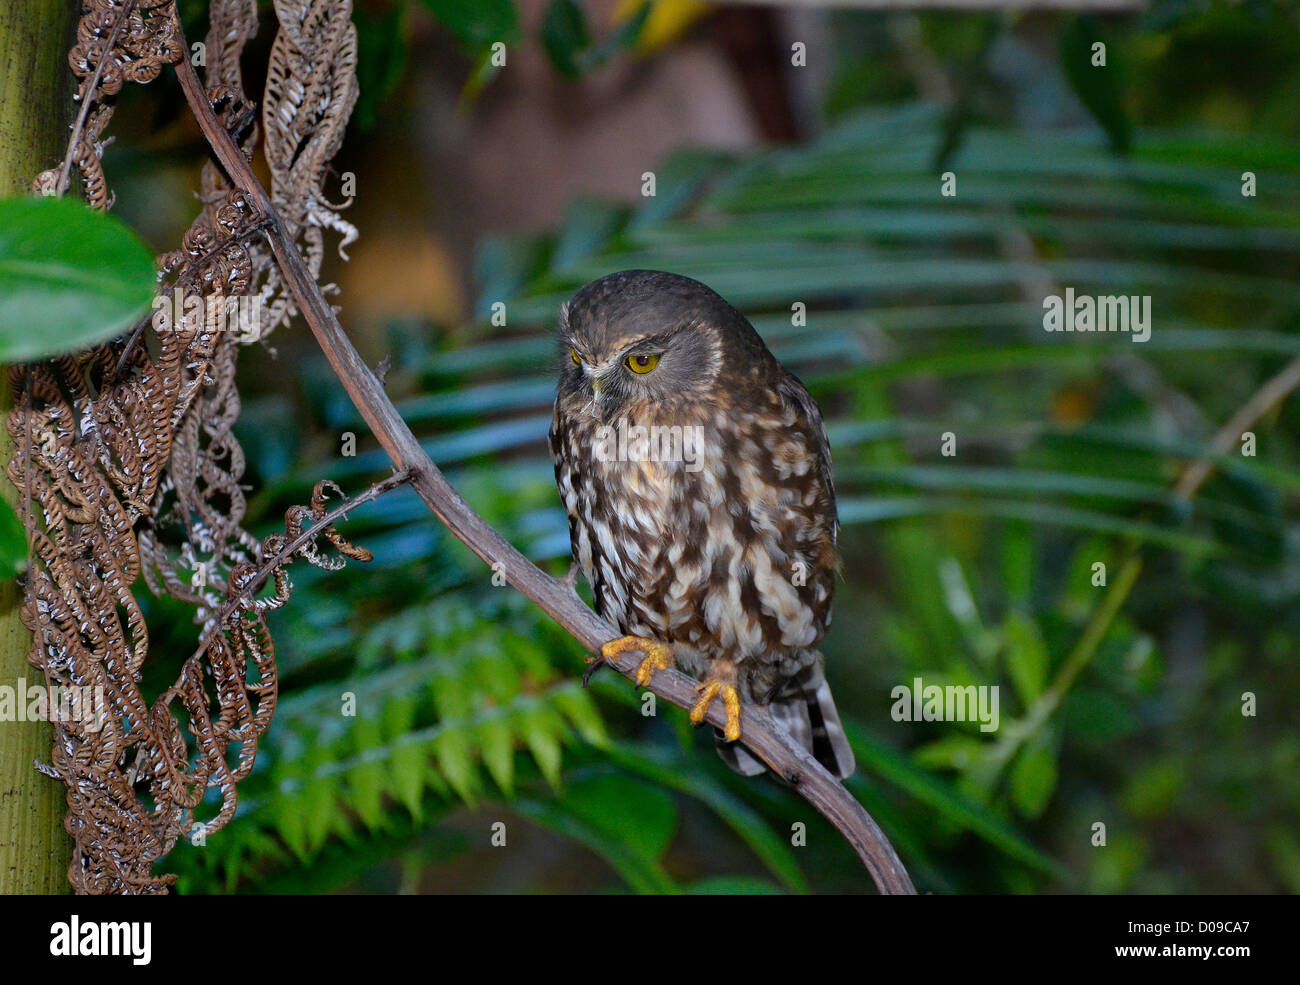 The Morepork - Tasmanian Spotted Owl or Southern Boobook, a small brown owl found across New Zealand and Australia Stock Photo